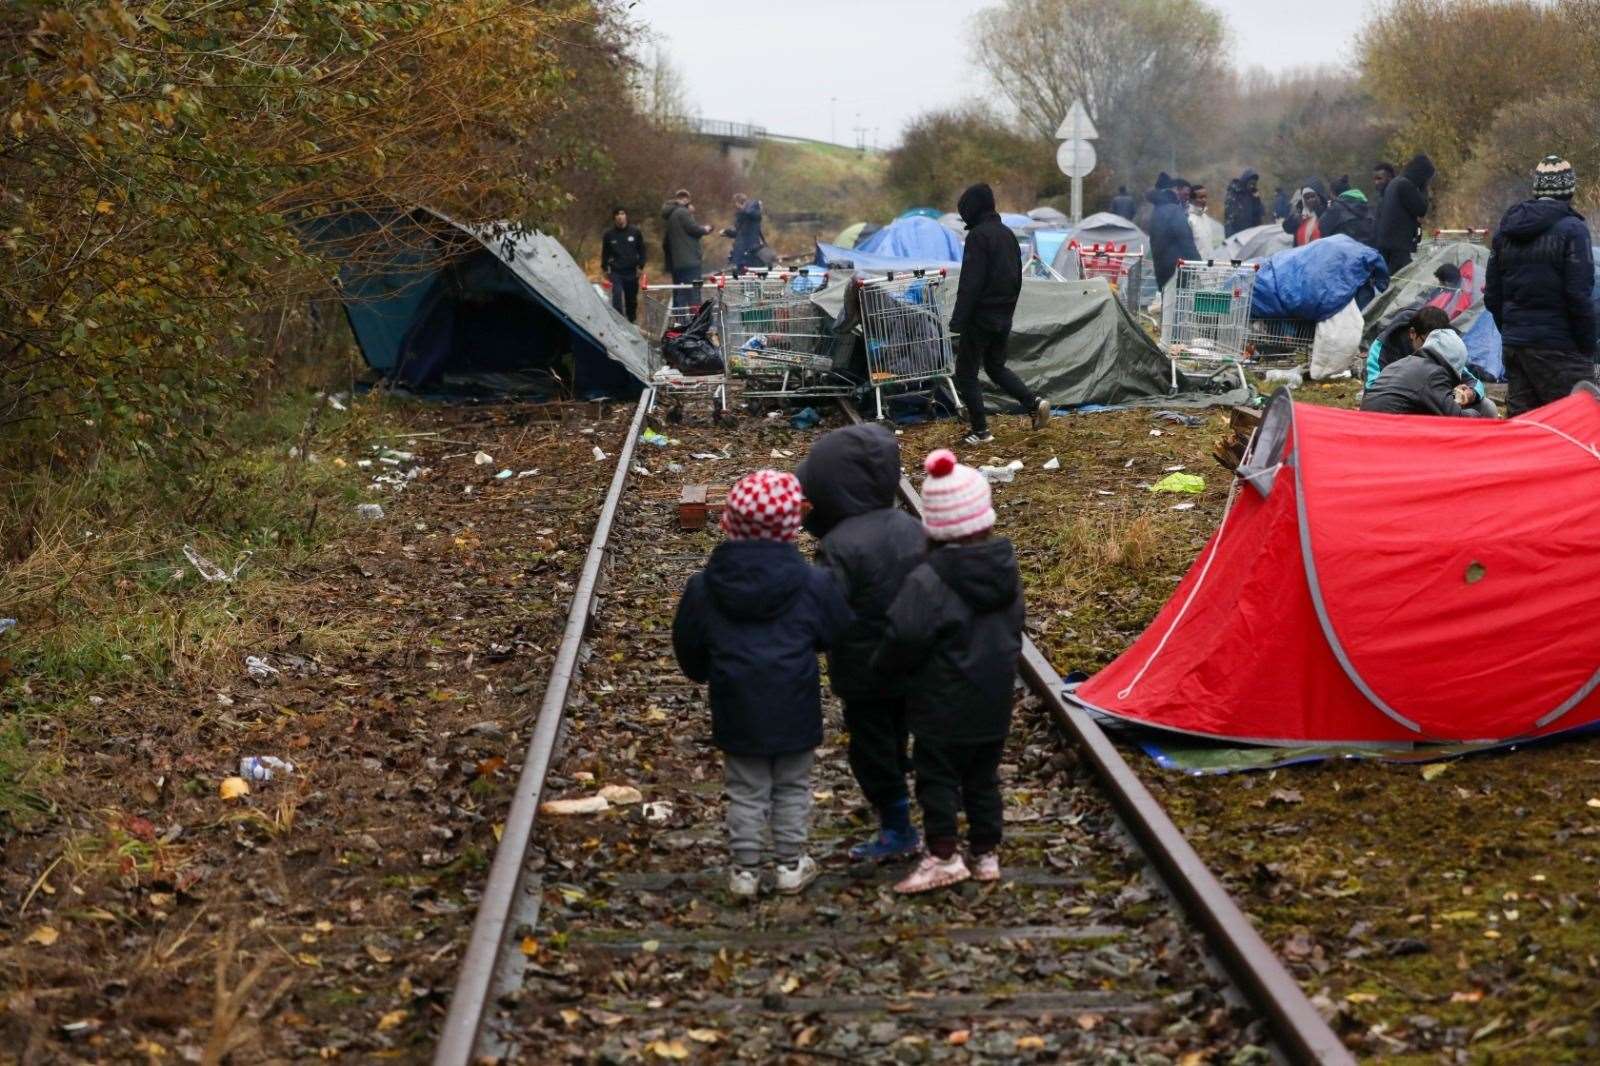 Asylum seekers at a camp in Frances Picture: UKNIP